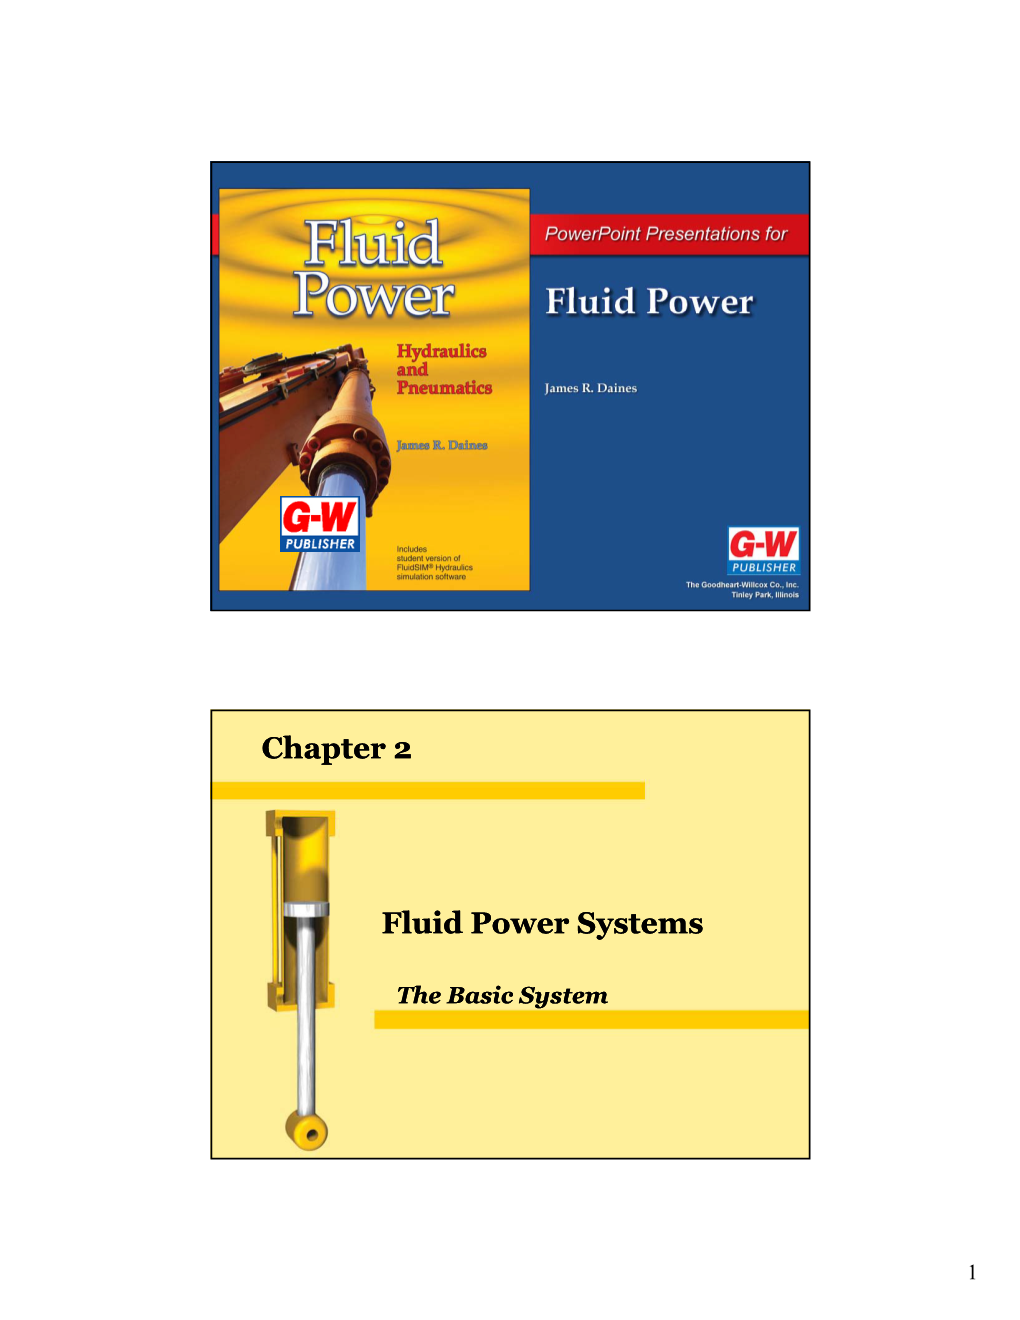 Chapter 2 Fluid Power Systems